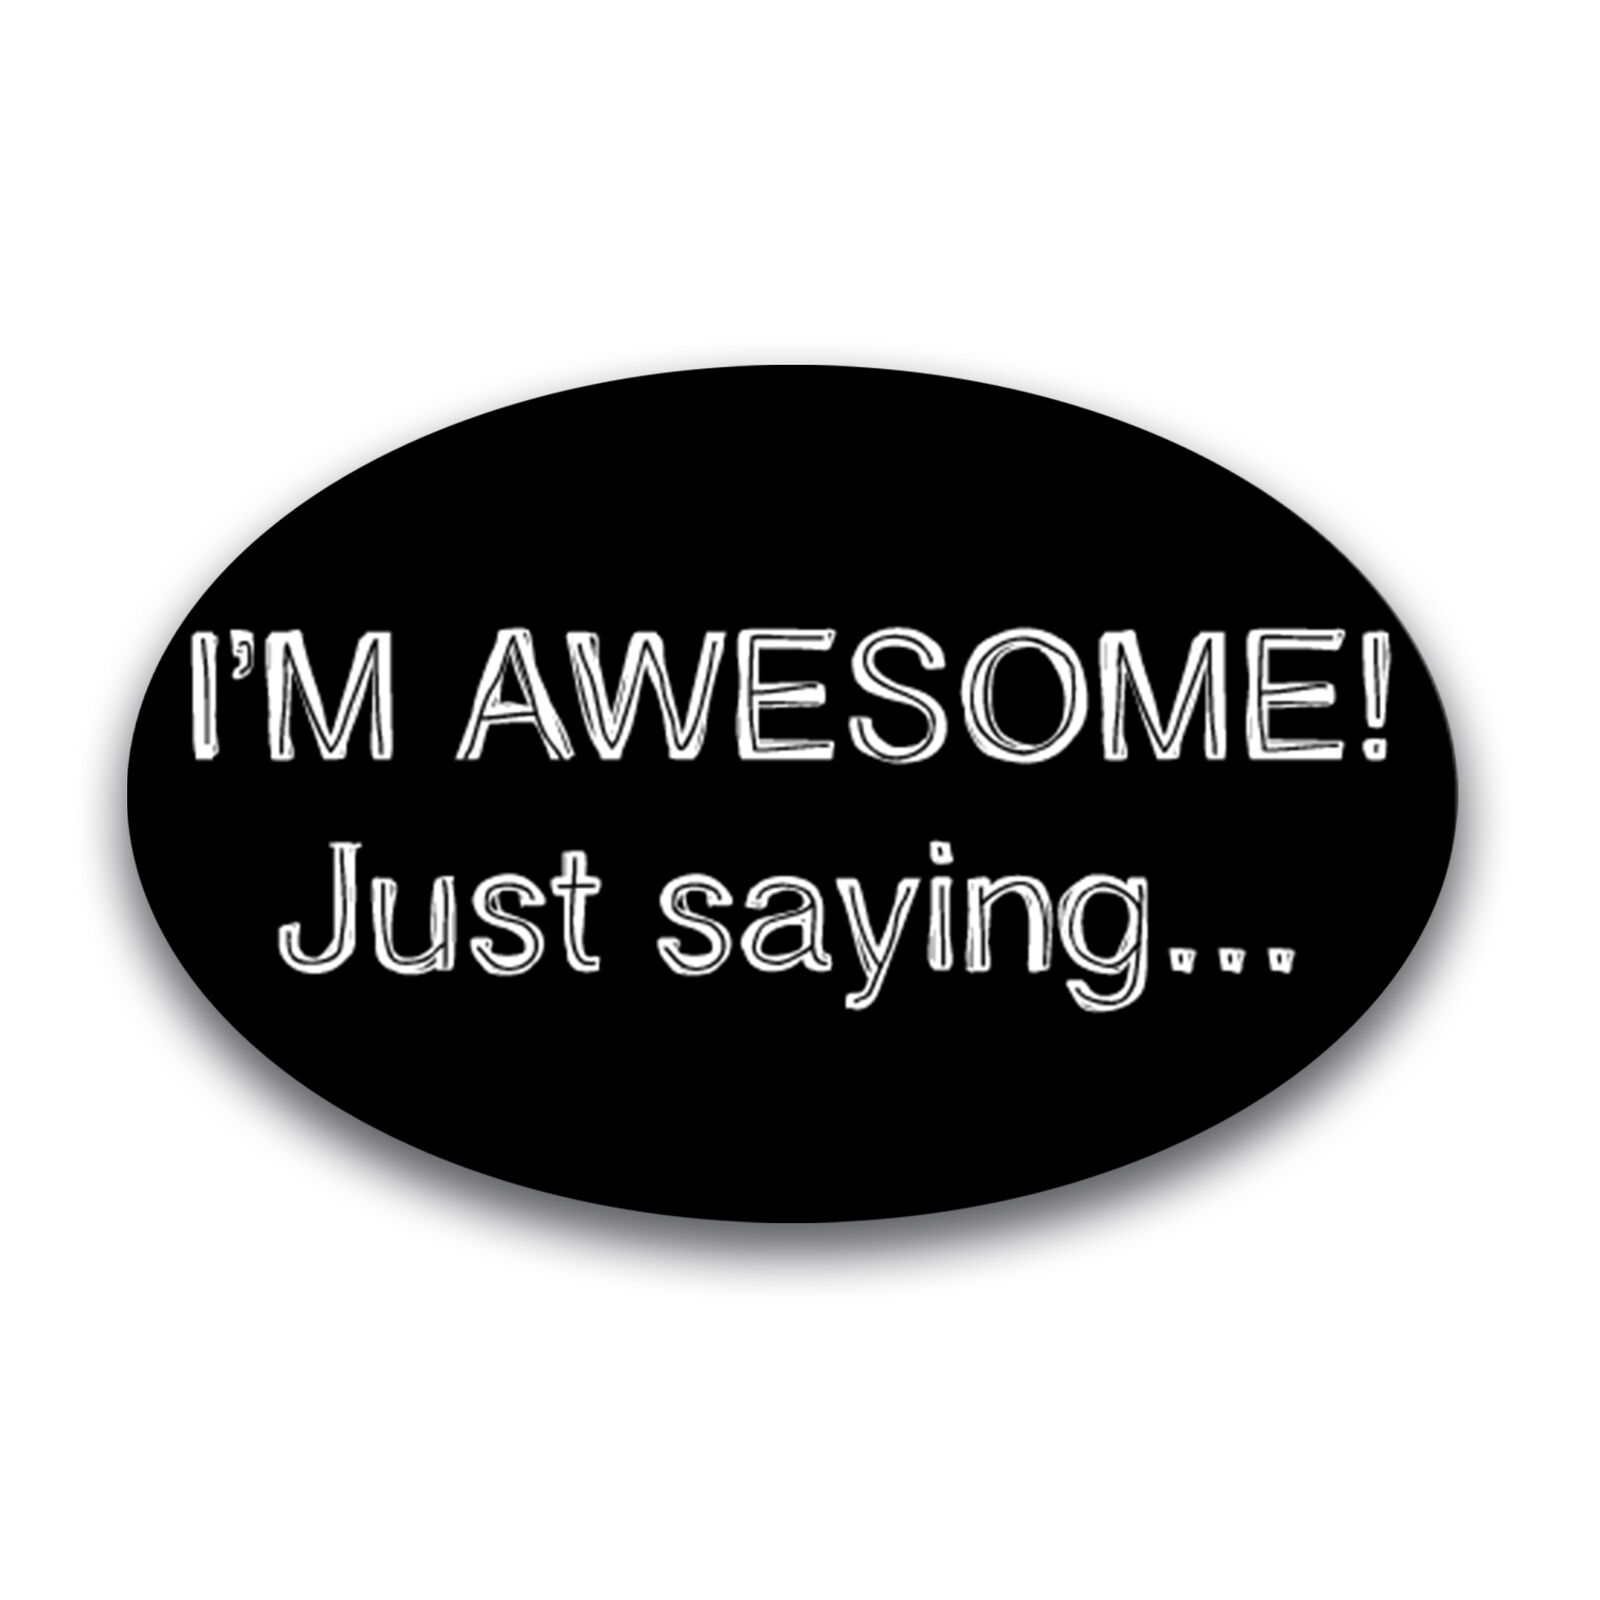 I'M AWESOME Just Saying Oval Magnet Decal, 4x6 Inches, Automotive Magnet